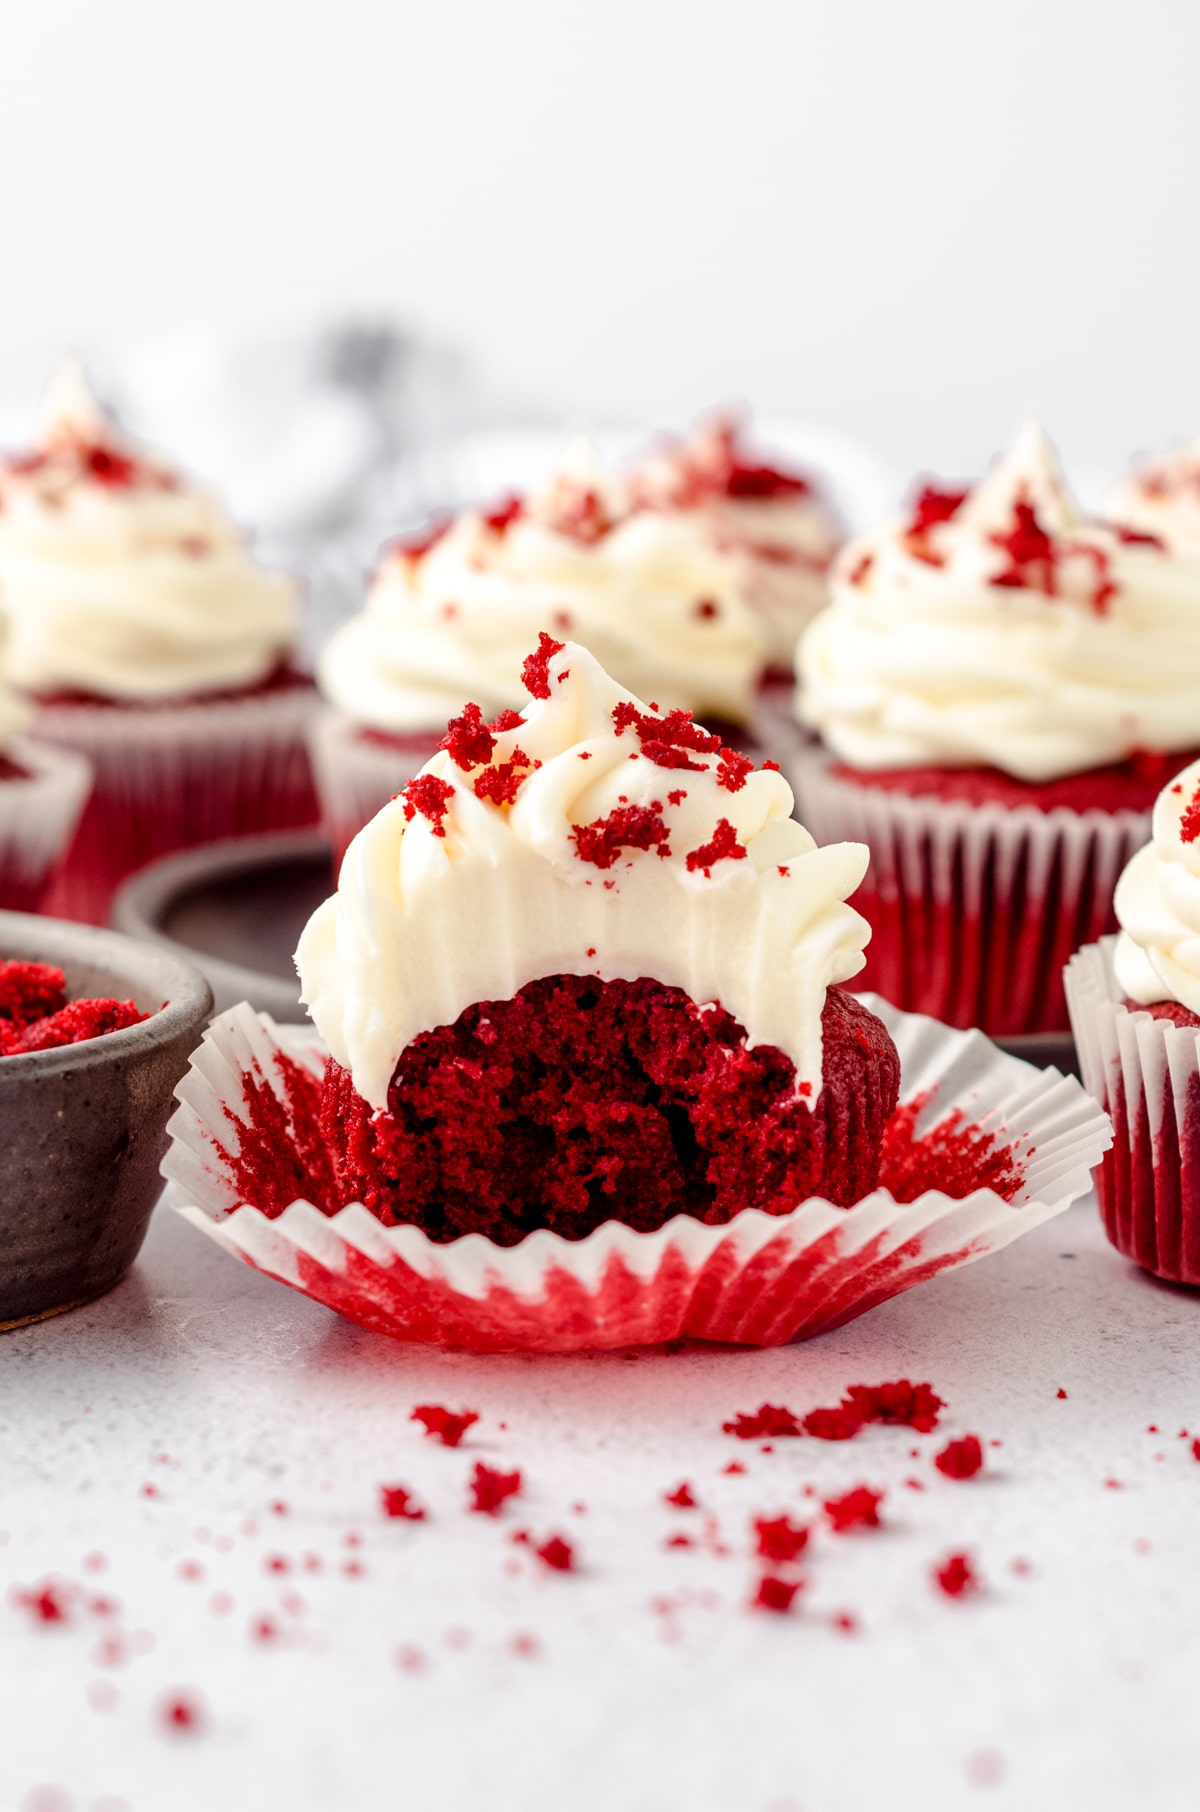 A red velvet cupcake with cream cheese frosting with a bite taken out of it.